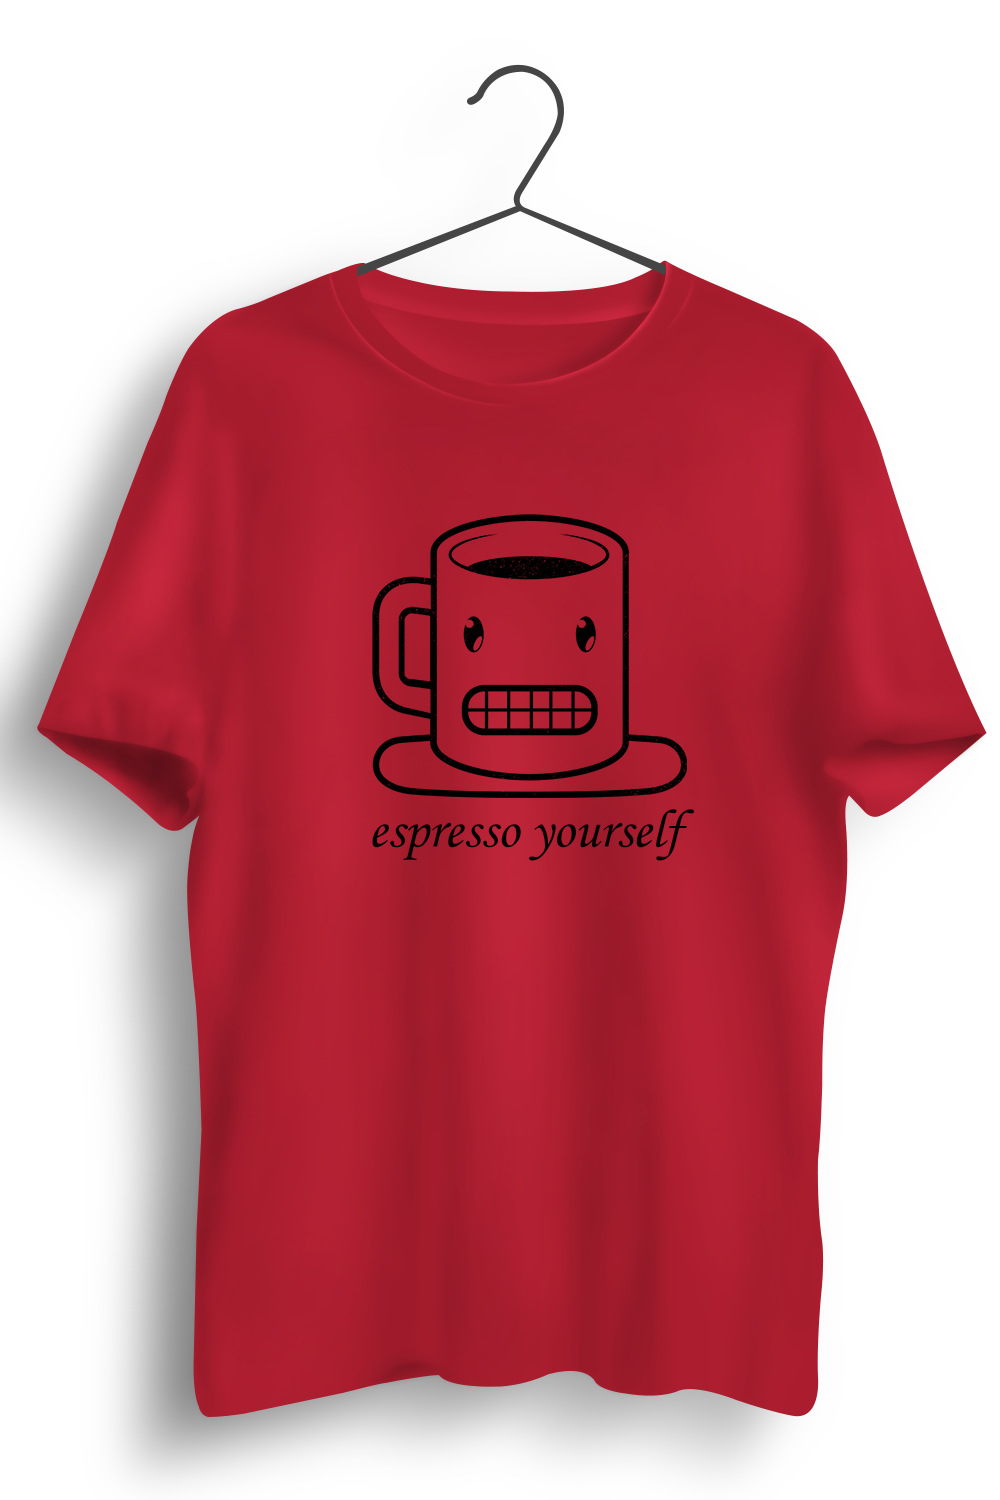 Espresso Yourself Graphic Printed Red Tshirt